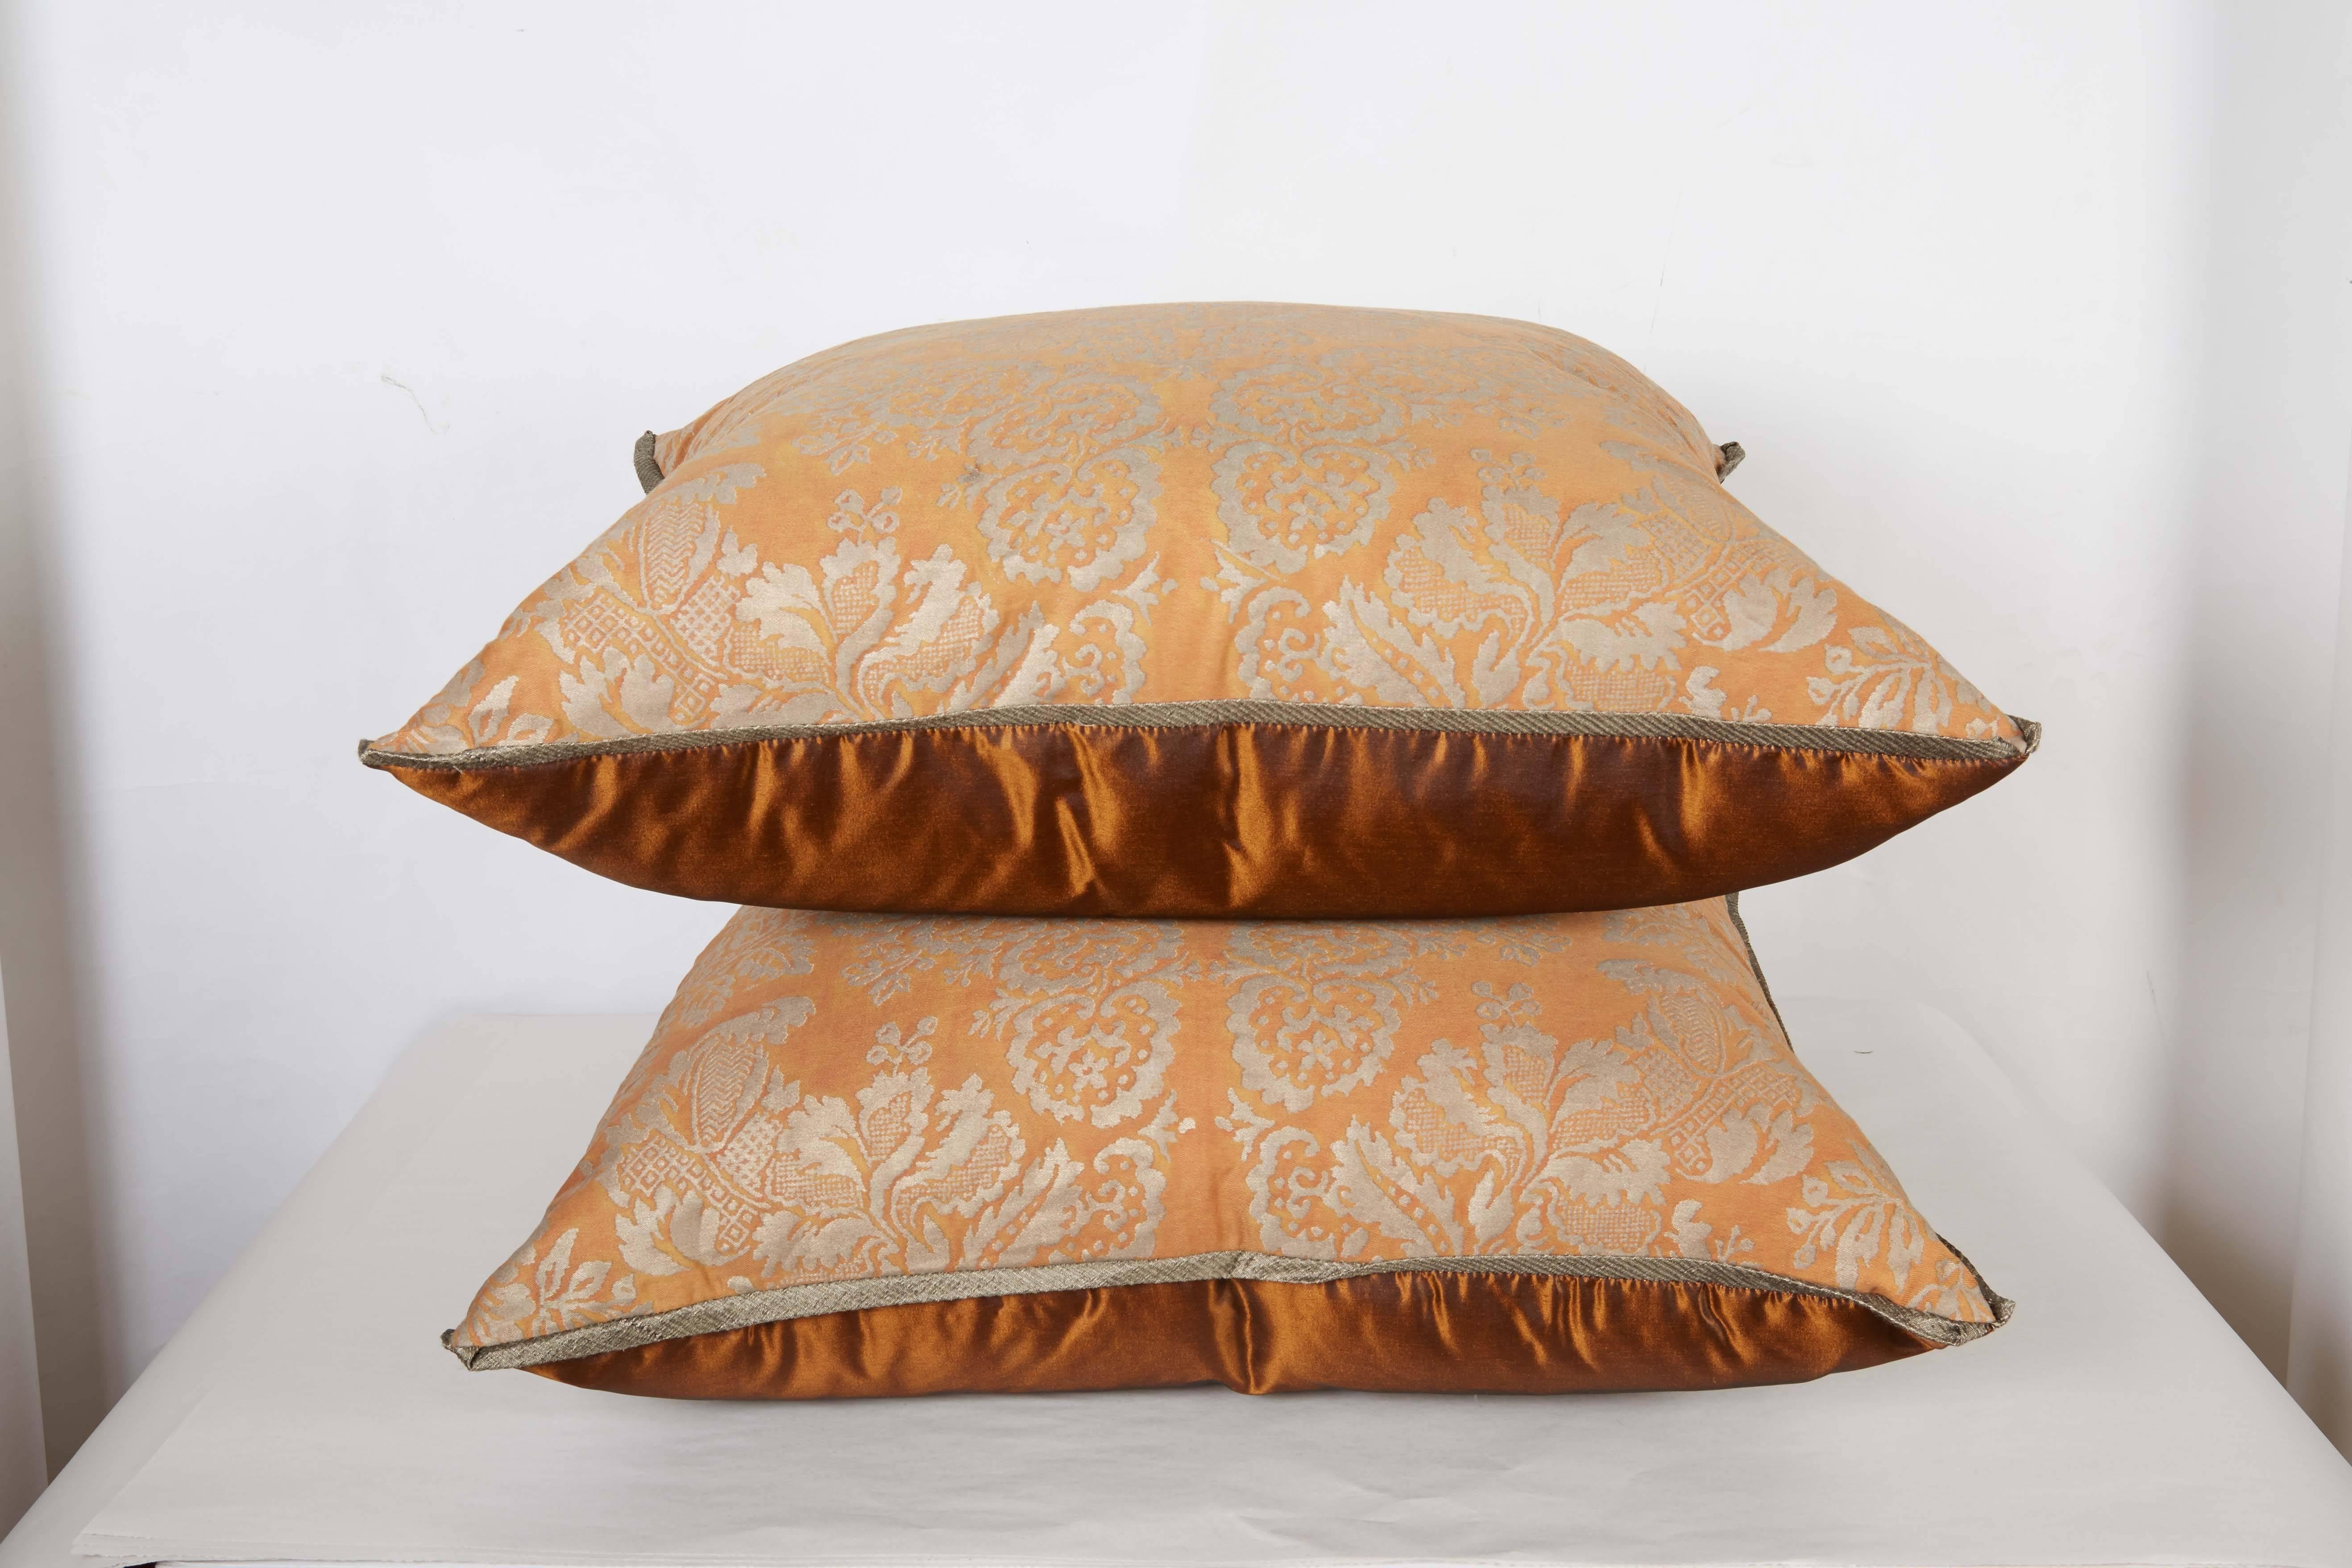 A pair of  Fortuny fabric cushions in the Solimena pattern, silvery gold and peach color way with silk bias edging and orange or rust taffeta backing, the pattern, a 17th century design named after the Neapolitan Baroque painter, Francesco Solimena